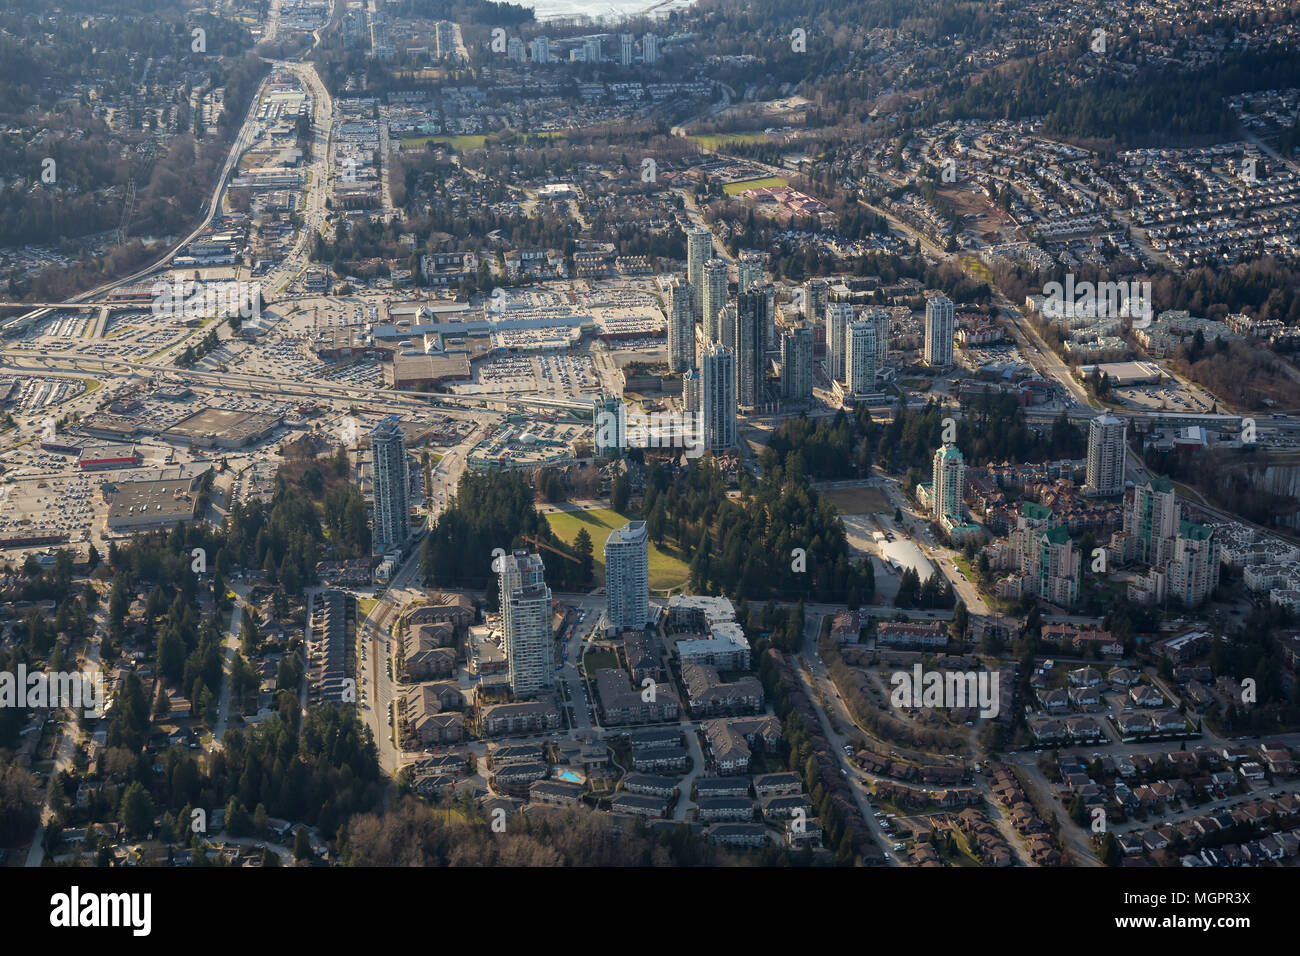 Aerial view of Coquitlam Centre Shopping Mall during a sunny day. Taken in Greater Vancouver, British Columbia, Canada. Stock Photo